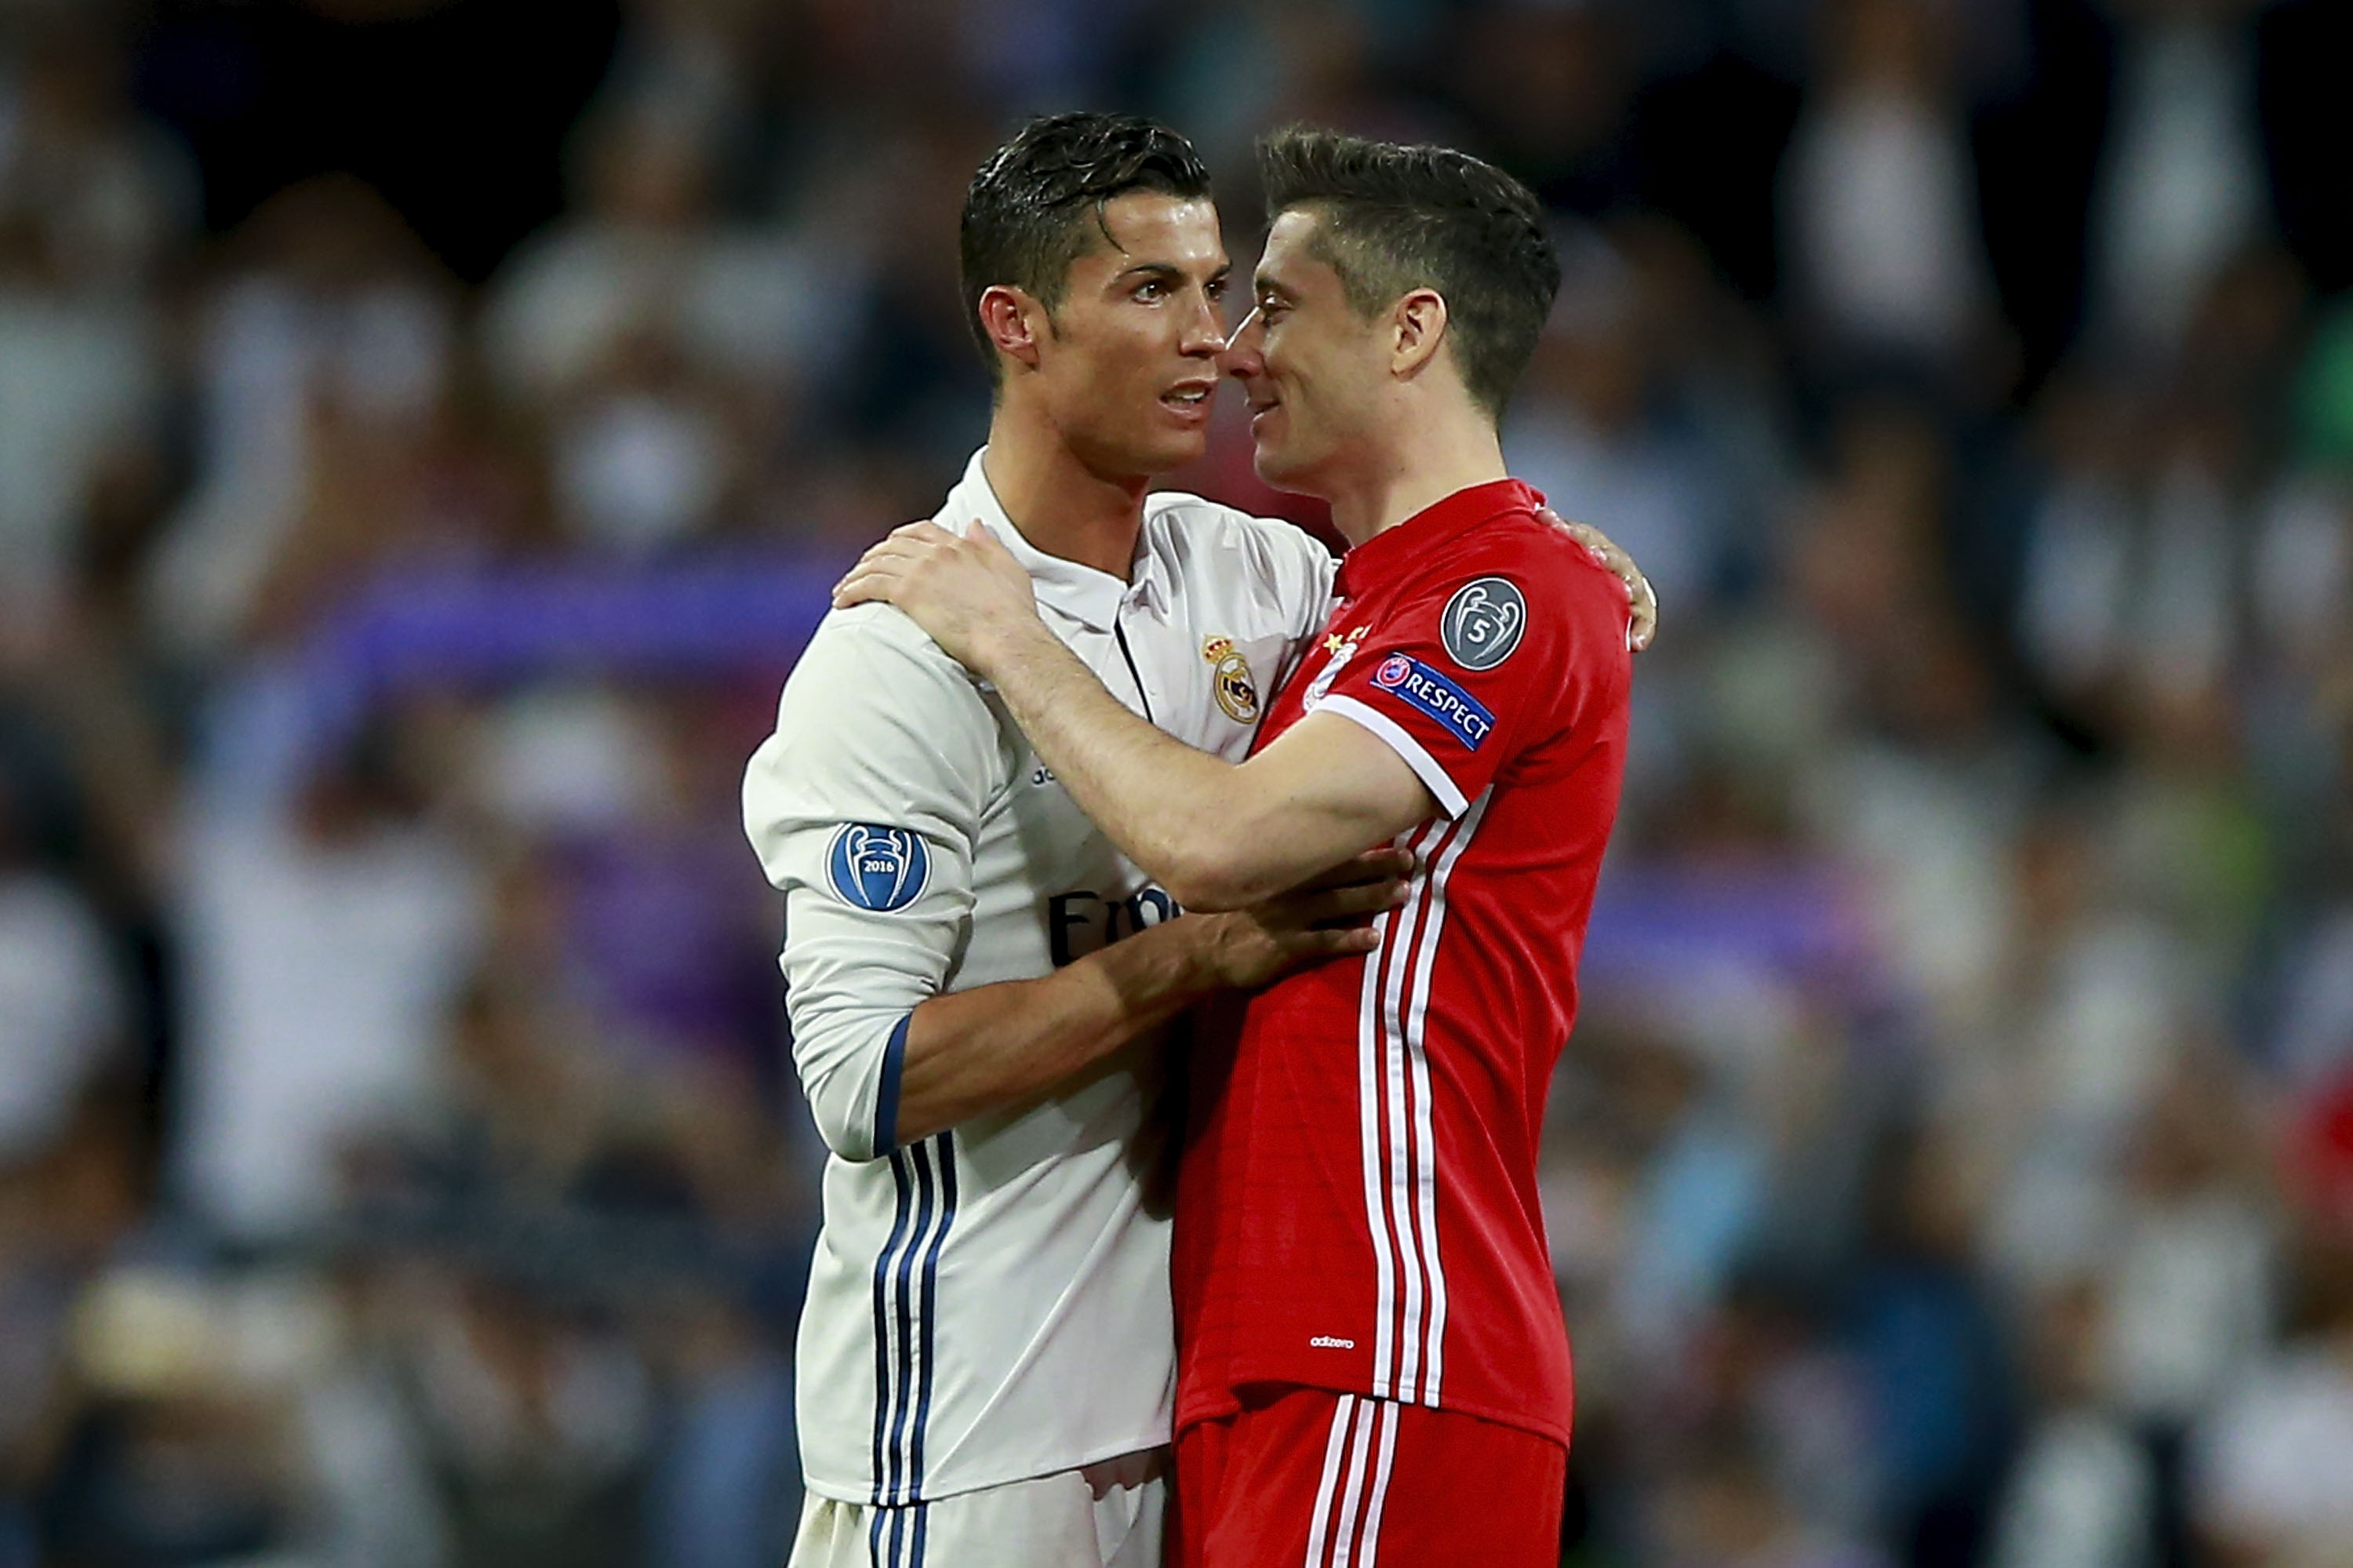 MADRID, SPAIN - APRIL 18:  Cristiano Ronaldo (L) of Real Madrid CF clashes hands with Robert Lewandowski (R) of Bayern Muenchen after the UEFA Champions League Quarter Final second leg match between Real Madrid CF and FC Bayern Muenchen at Estadio Santiago Bernabeu on April 18, 2017 in Madrid, Spain.  (Photo by Gonzalo Arroyo Moreno/Getty Images)